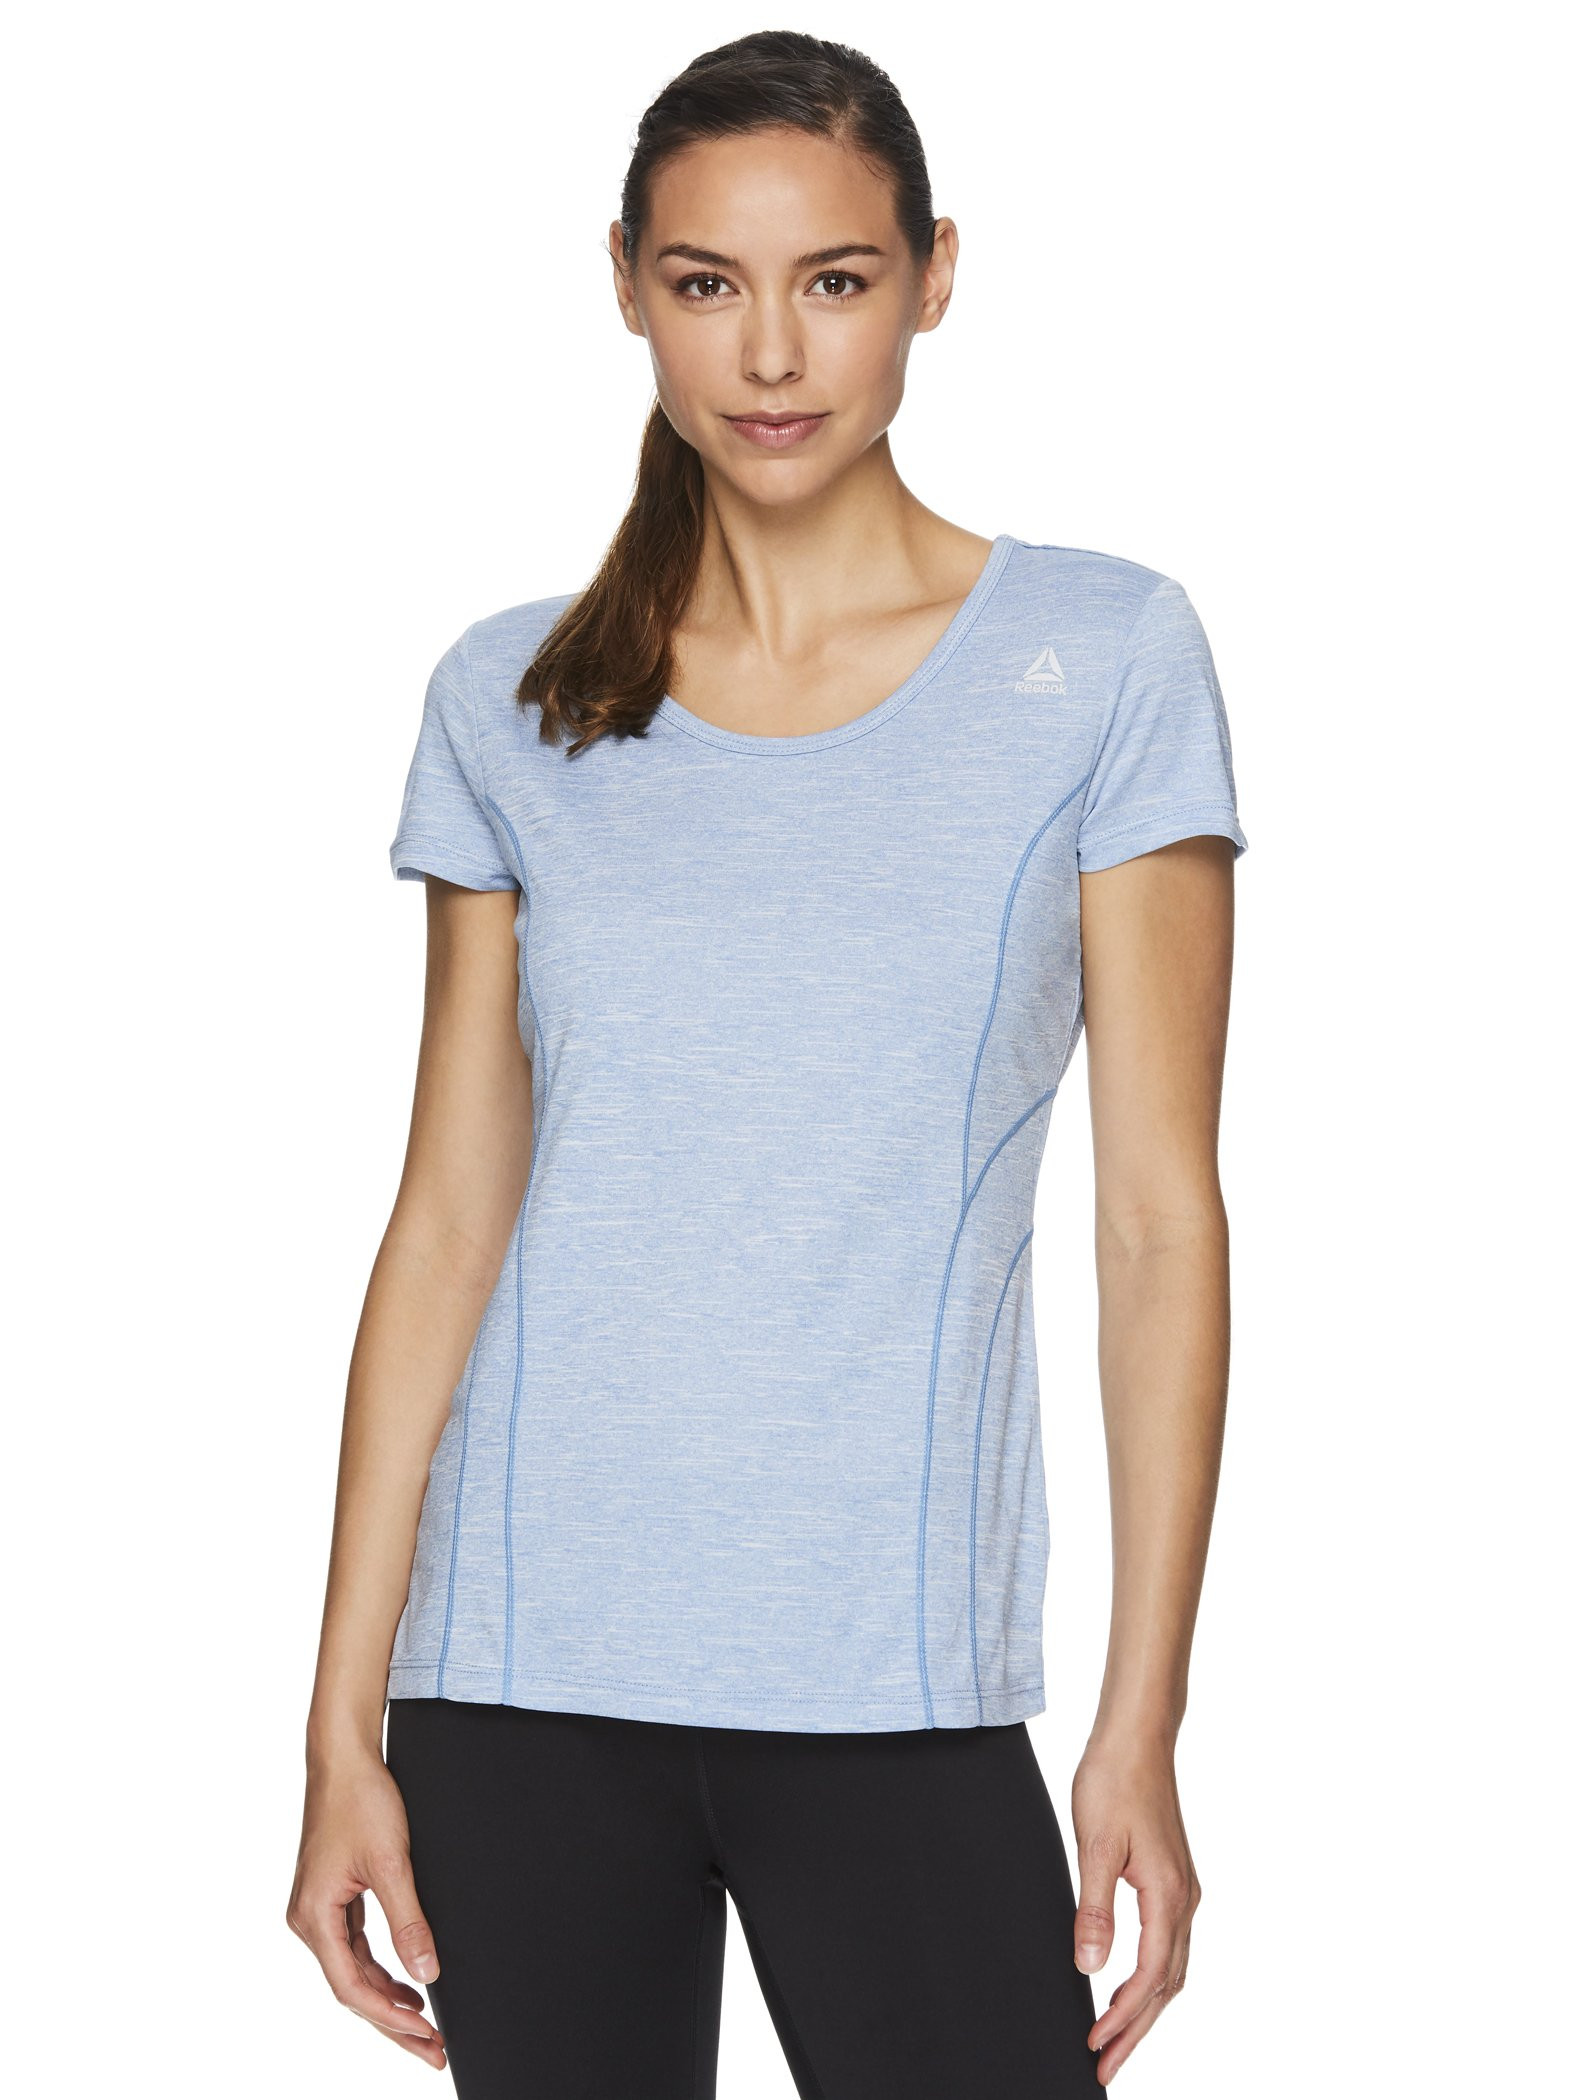 Make this Reebok top your go-to gym shirt for comfort and support when you need it most during your workouts. Product Features FITNESS FIRST: Make this Reebok top your go-to gym shirt for comfort and support when you need it most during your workouts. Thi #denim